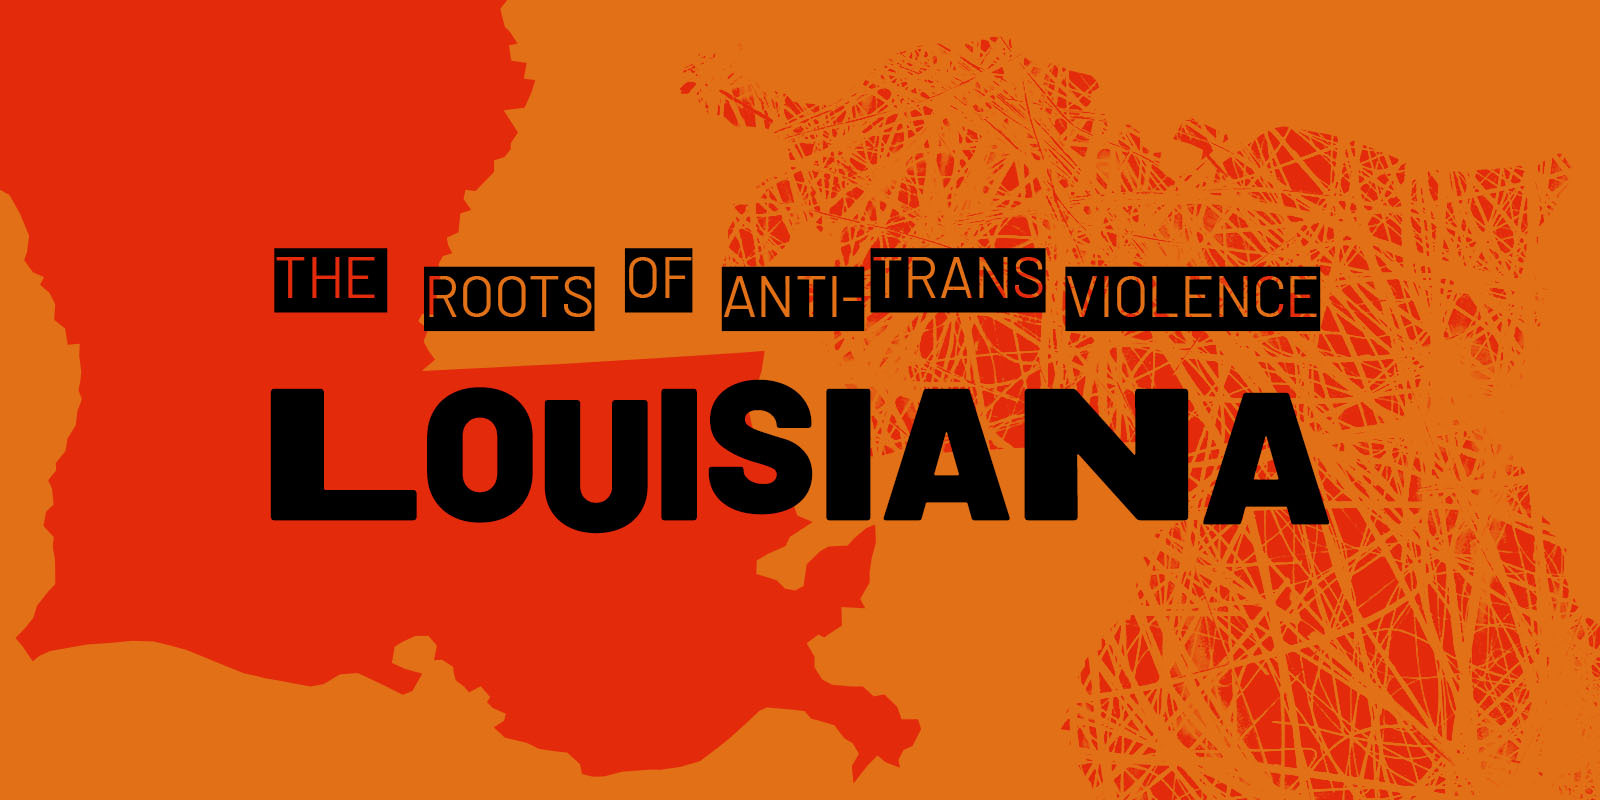 "The Roots of Anti-Trans Violence: Louisiana" against an orange background.